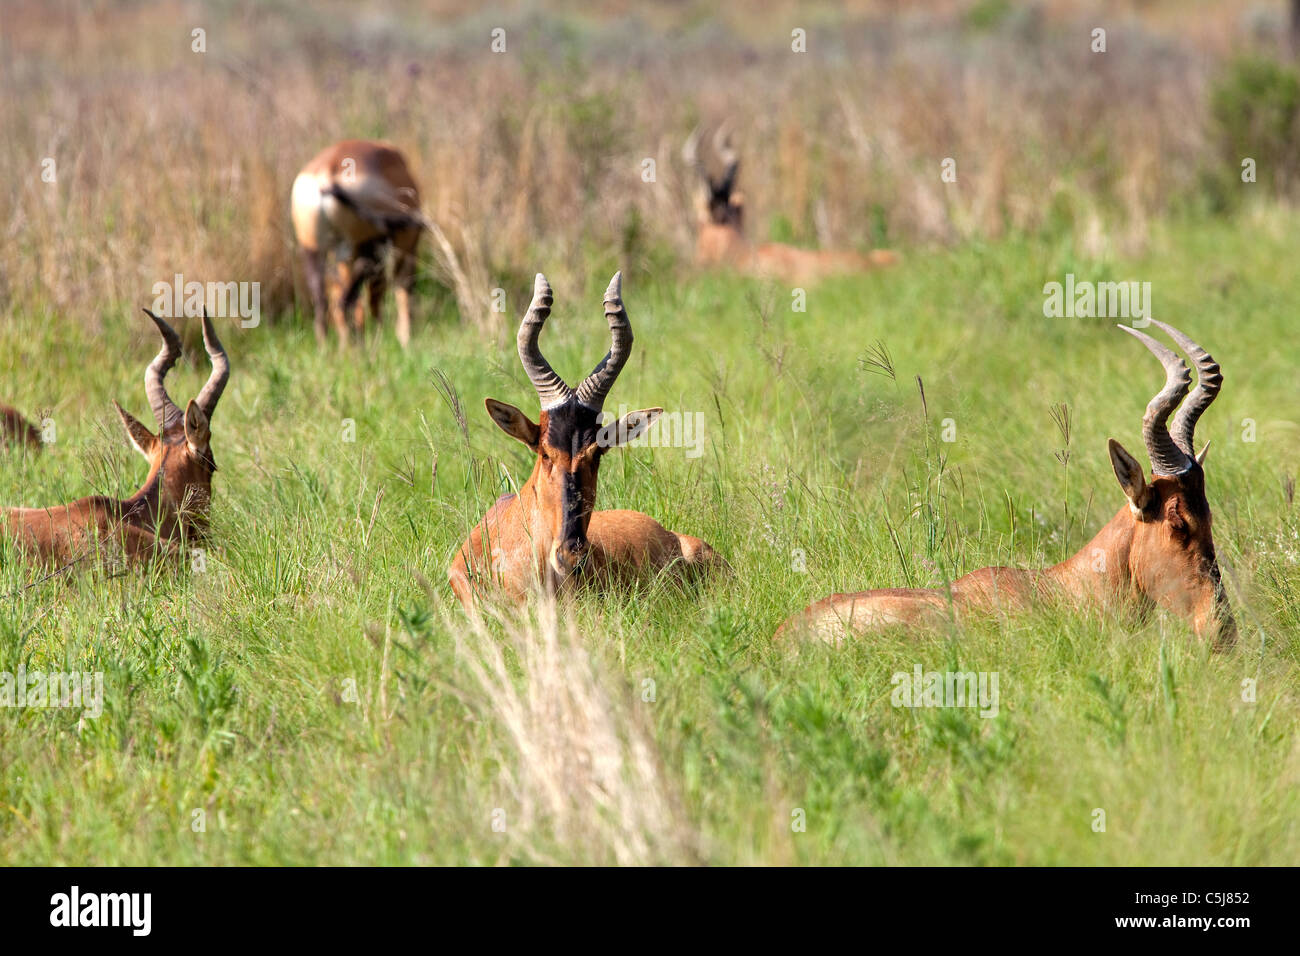 Red hartebeest lying in grass Stock Photo